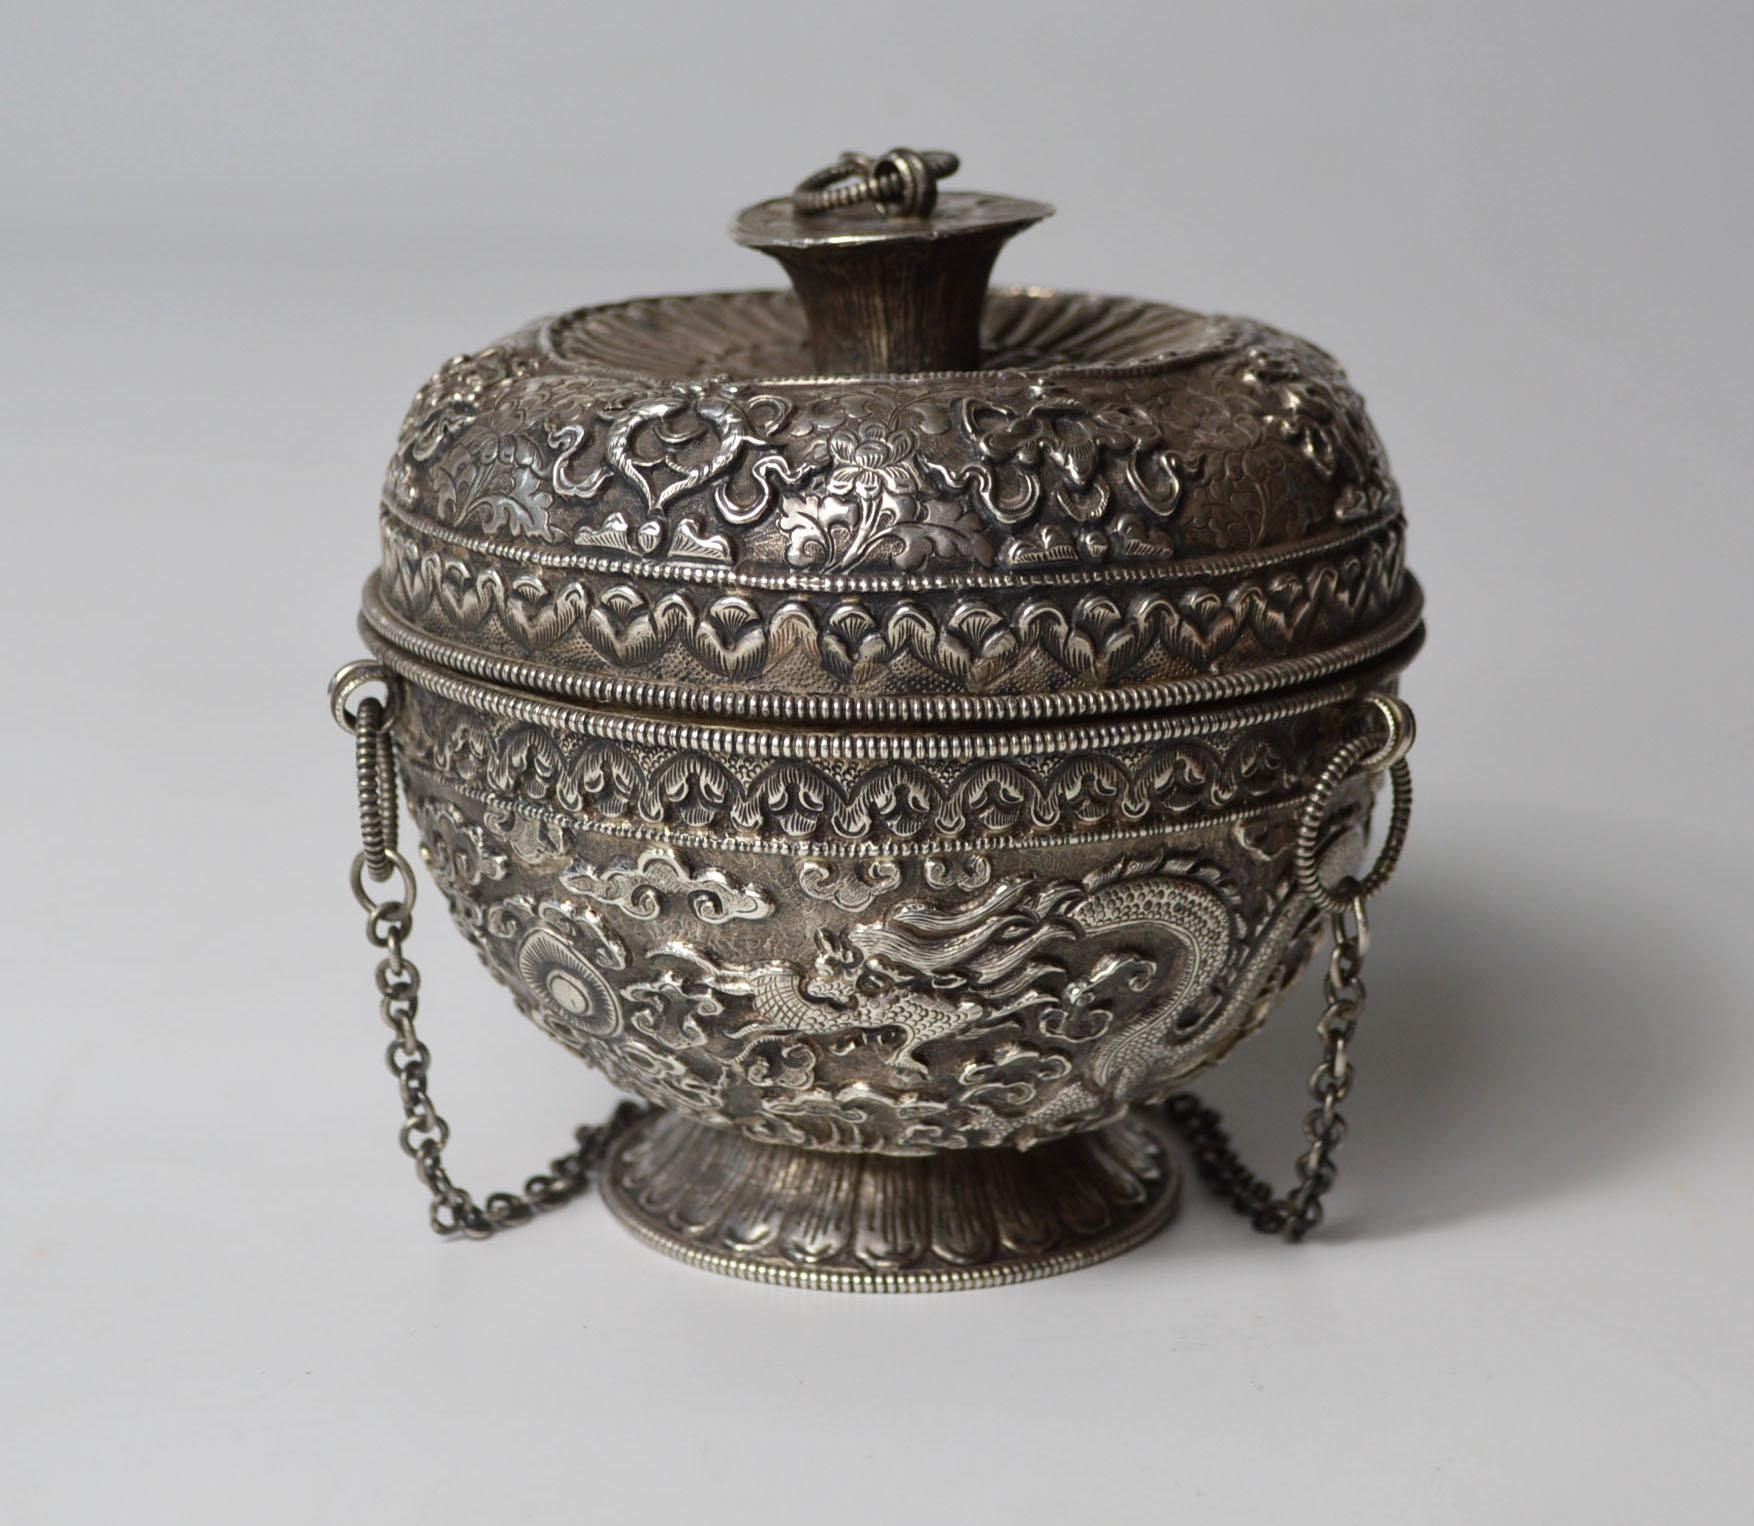 Superb rare Chinese/Sino Tibetan Silver Altar vessel
Stunning silver altar vessel the footed bowl with lidded top and hanging chain 
Decorated all over with intricate and masterful repousse and chased designs embellished dragon floral cloud and